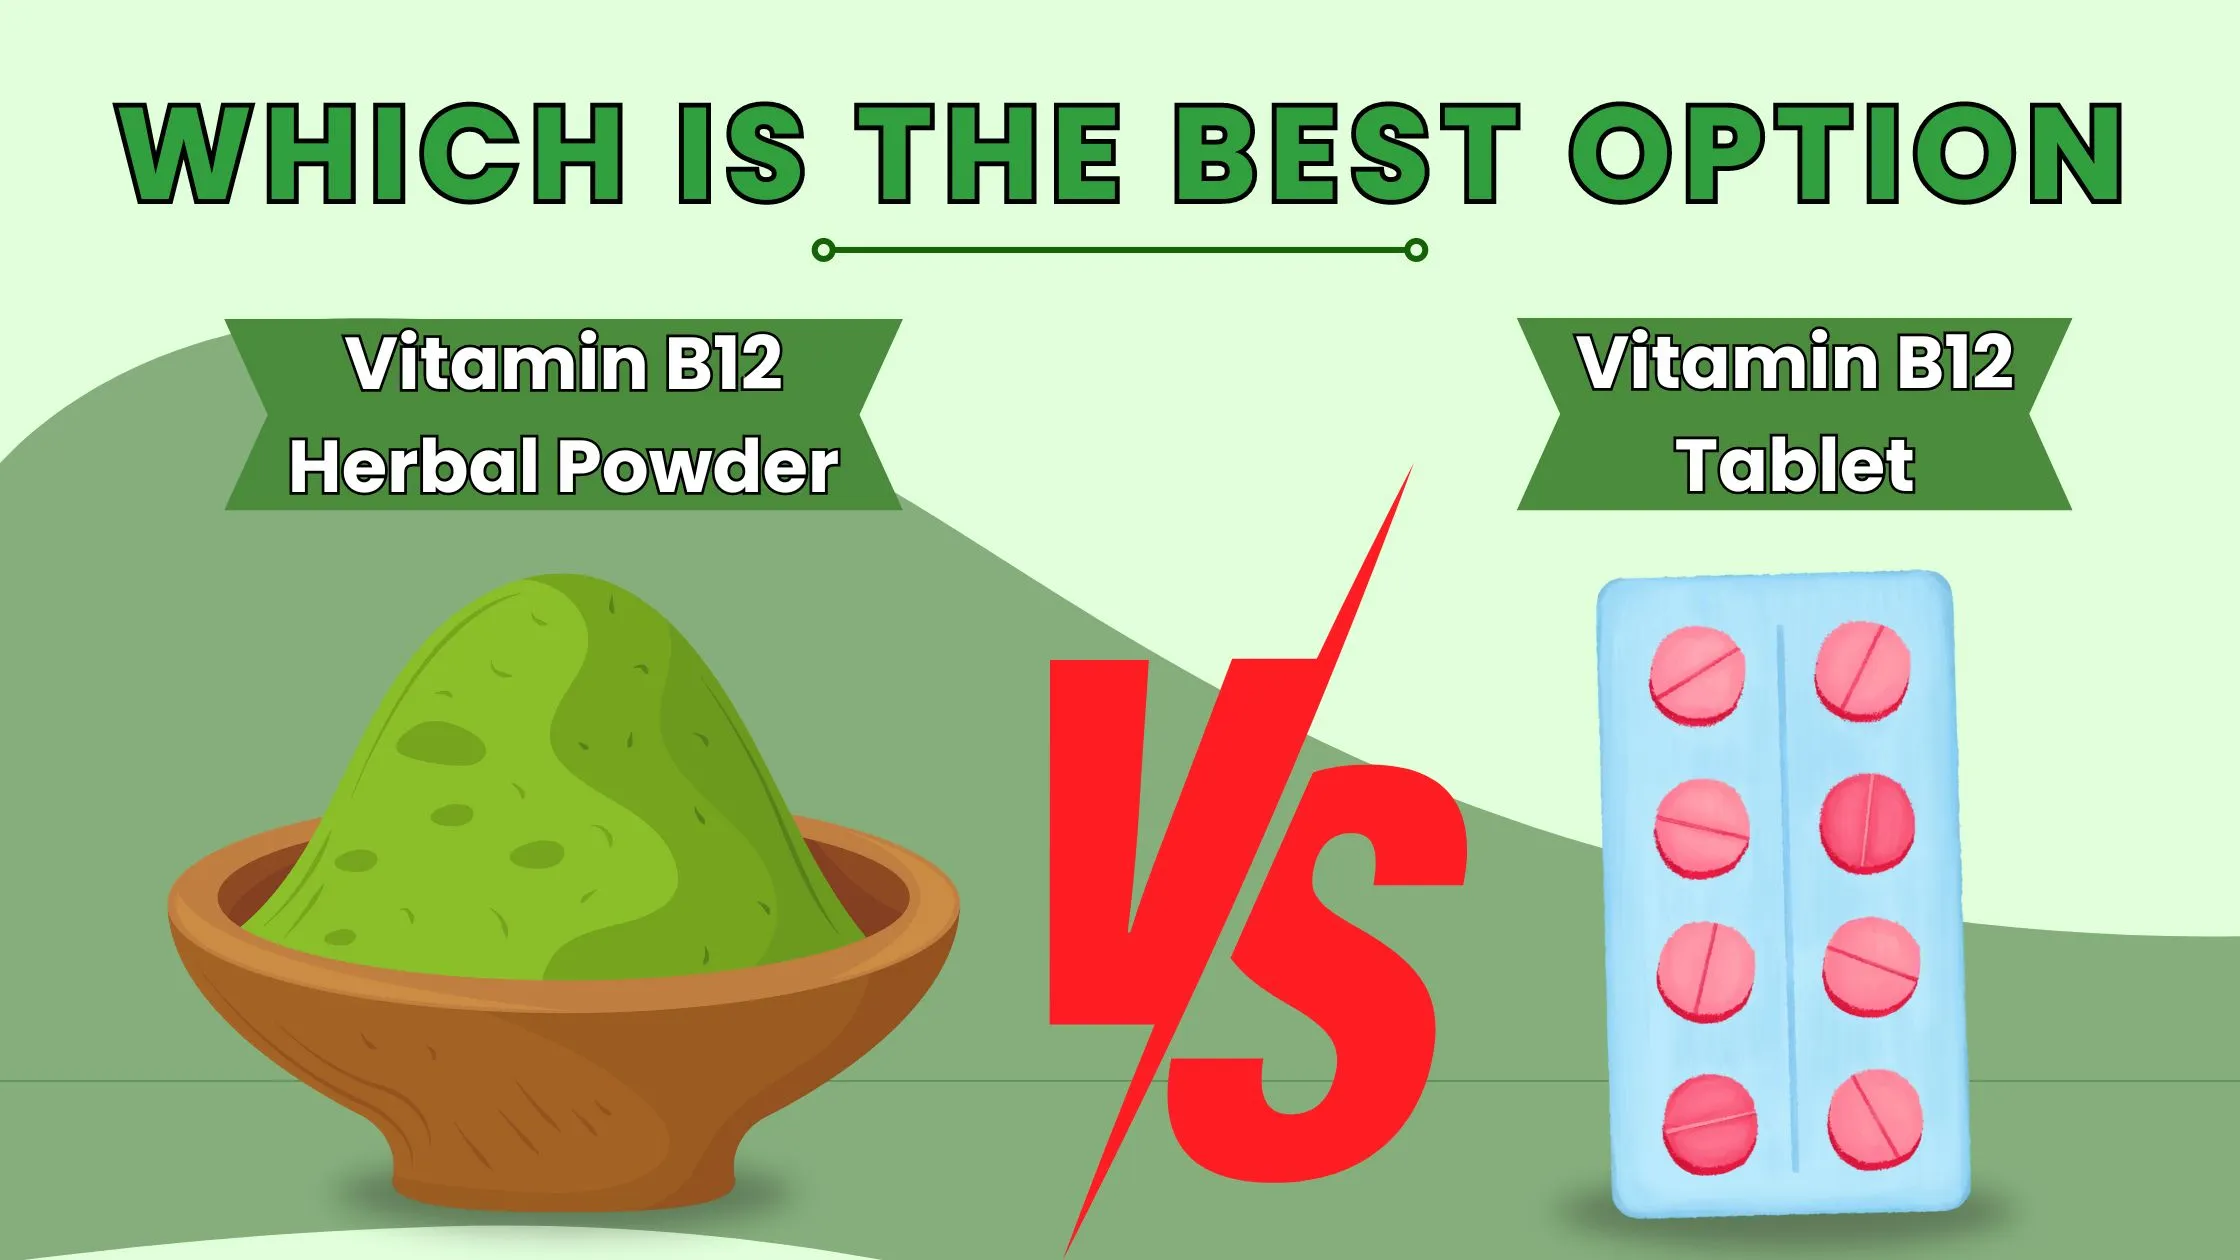 Which is the best option, vitamin B12 herbal powder or vitamin B12 tablet?